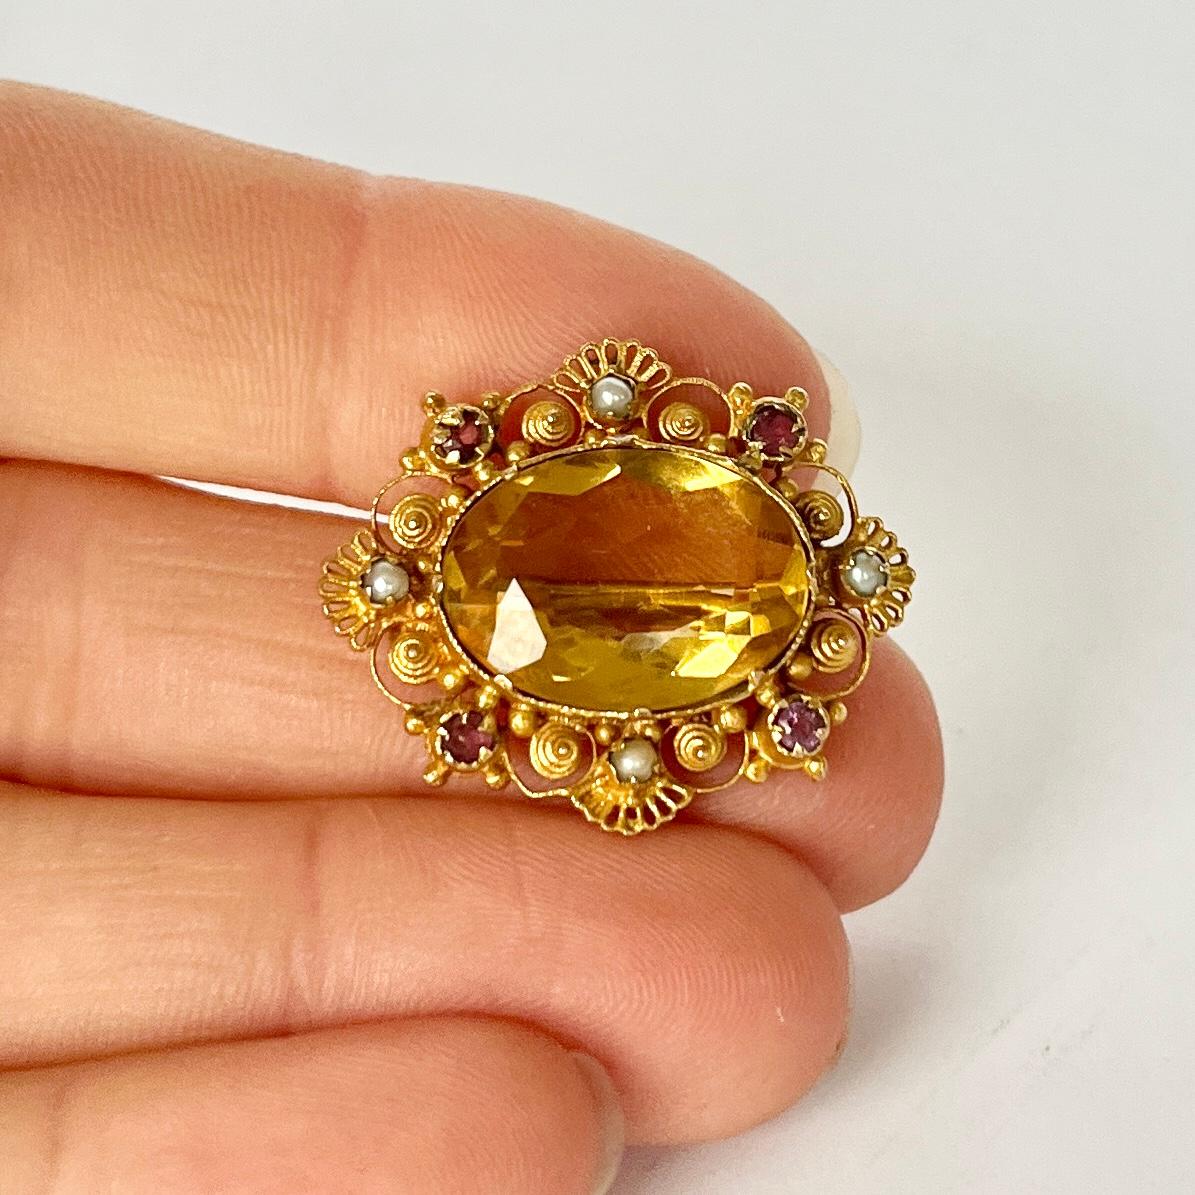 This exquisite brooch holds so much delicate detail. The gold is sculpted into scrolls, swirls and rope twists. The main event is the citrine stone and surrounding this are four rubies and four pearls. 

Citrine Dimensions: 16x12mm
Brooch